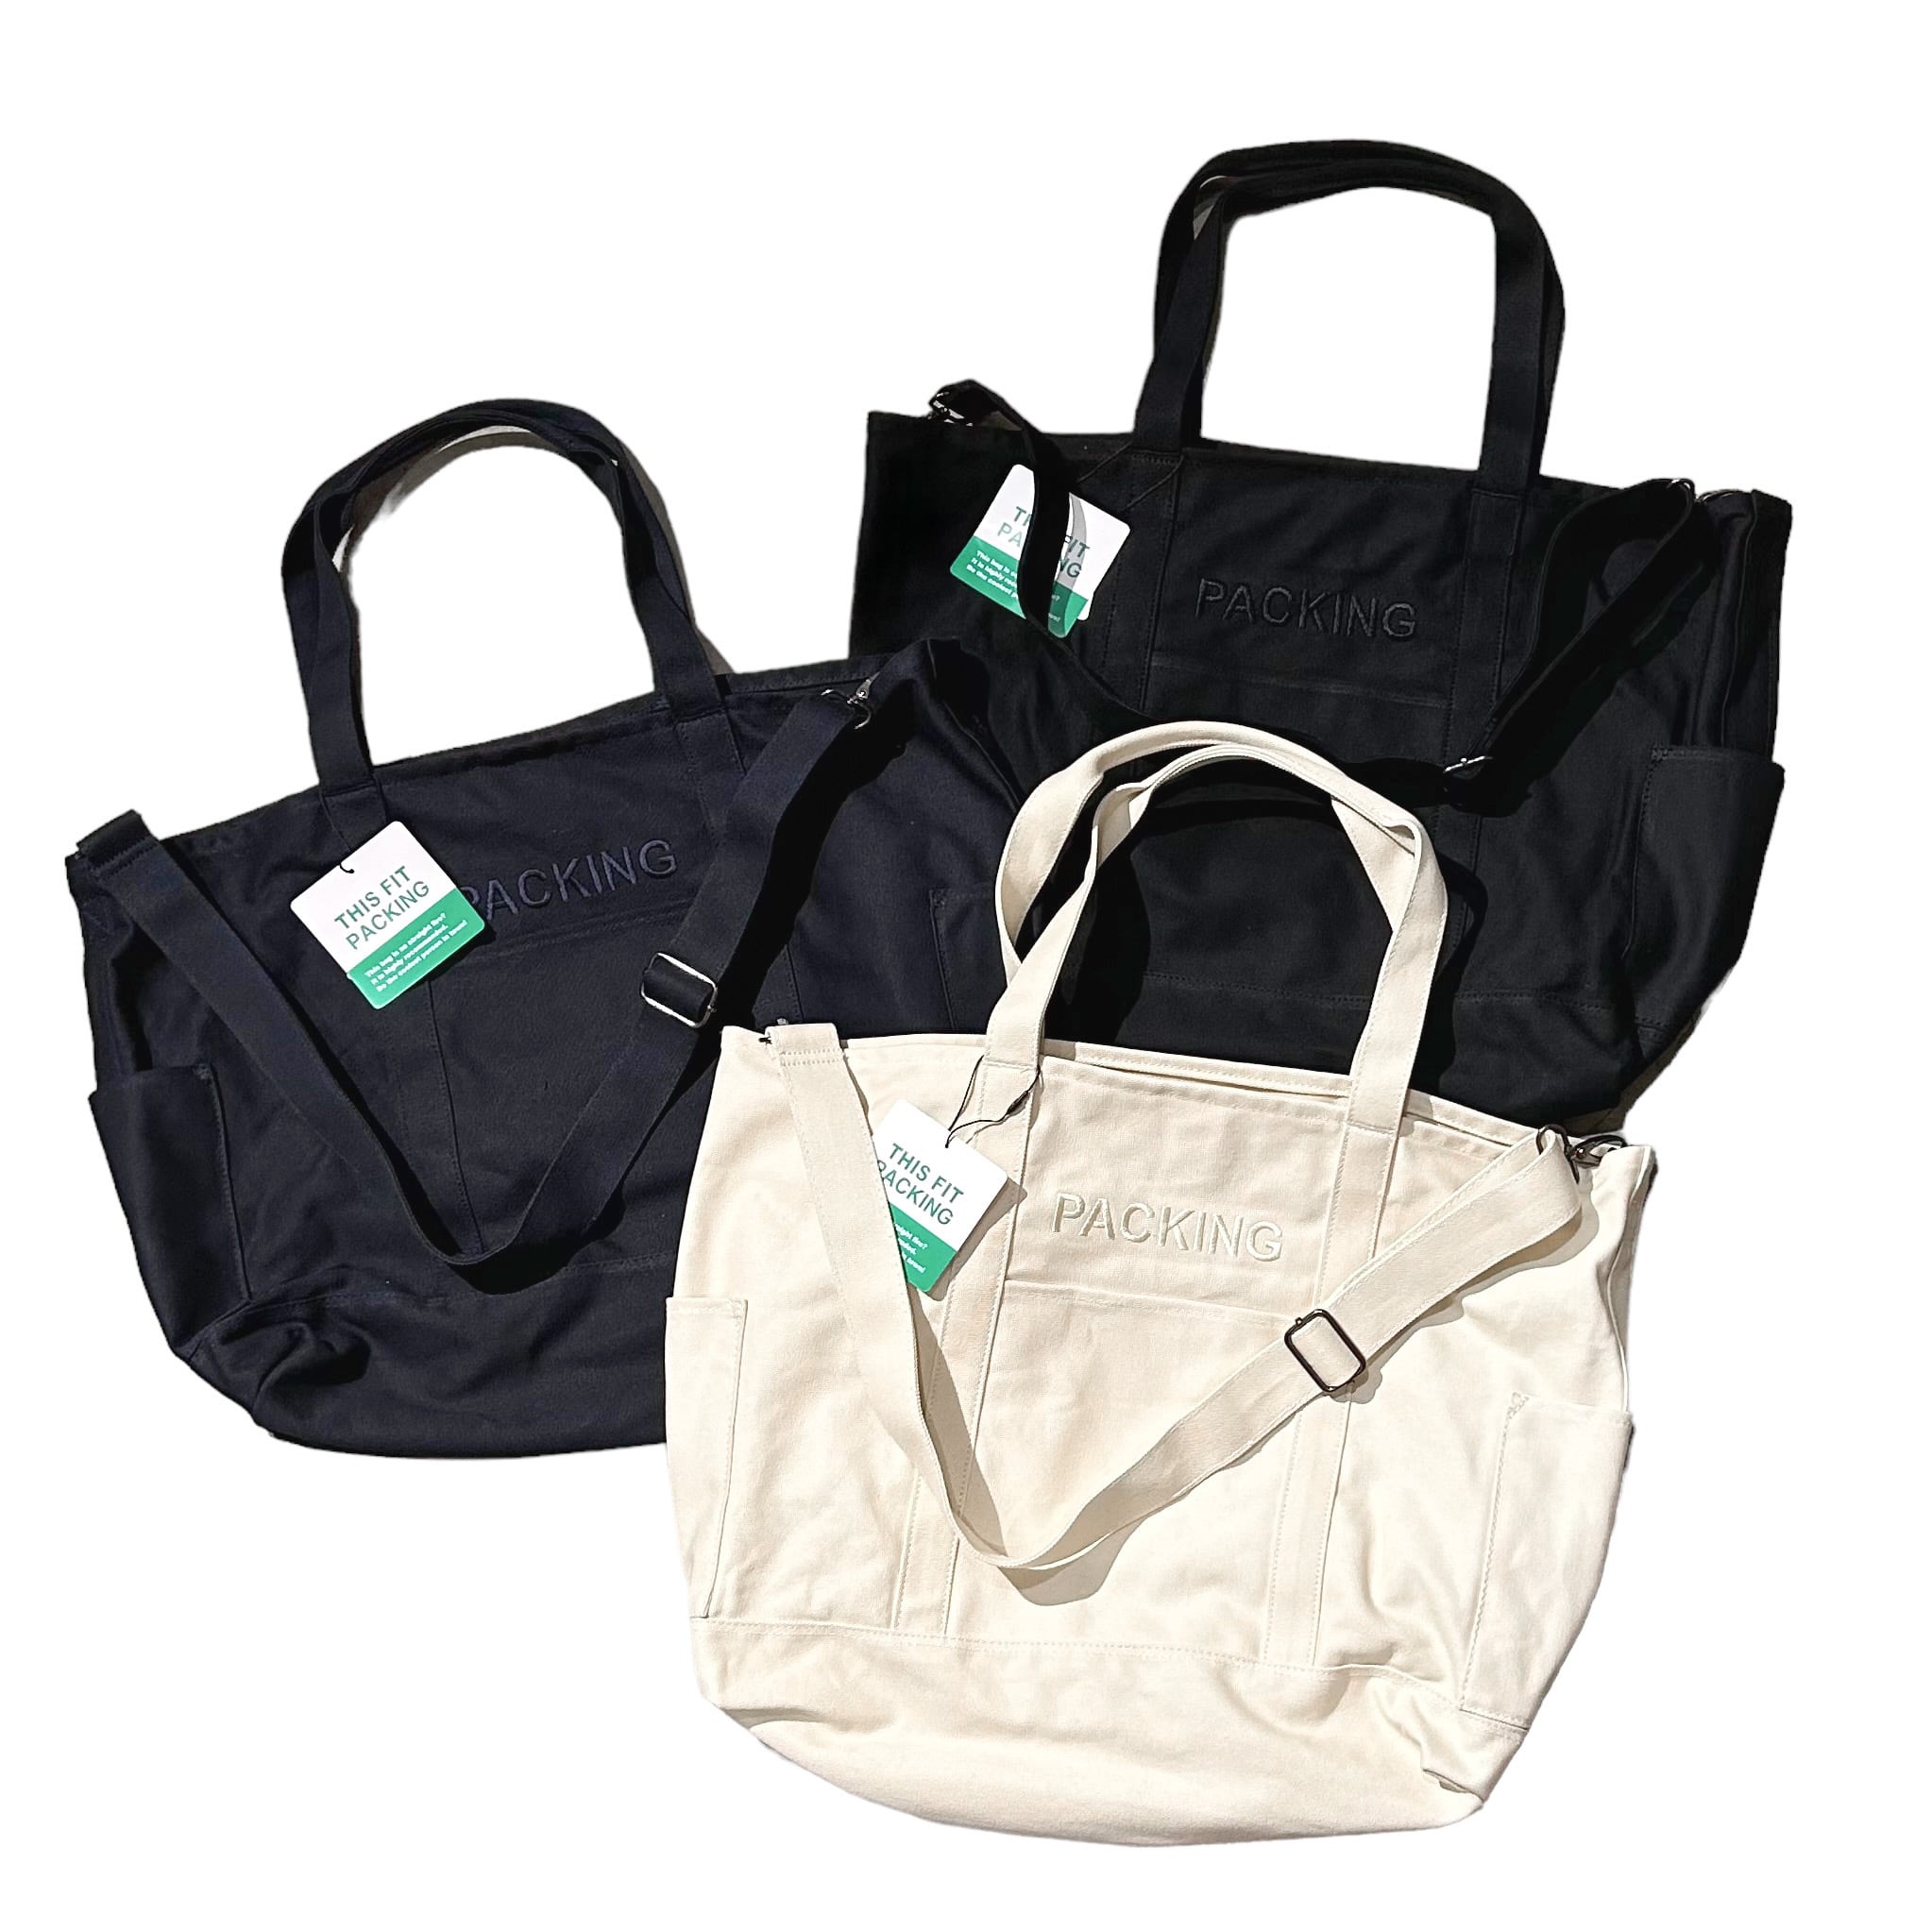 PACKING CANVAS UTILITY TOTE - BLACK NATURAL NAVY (パッキング ト